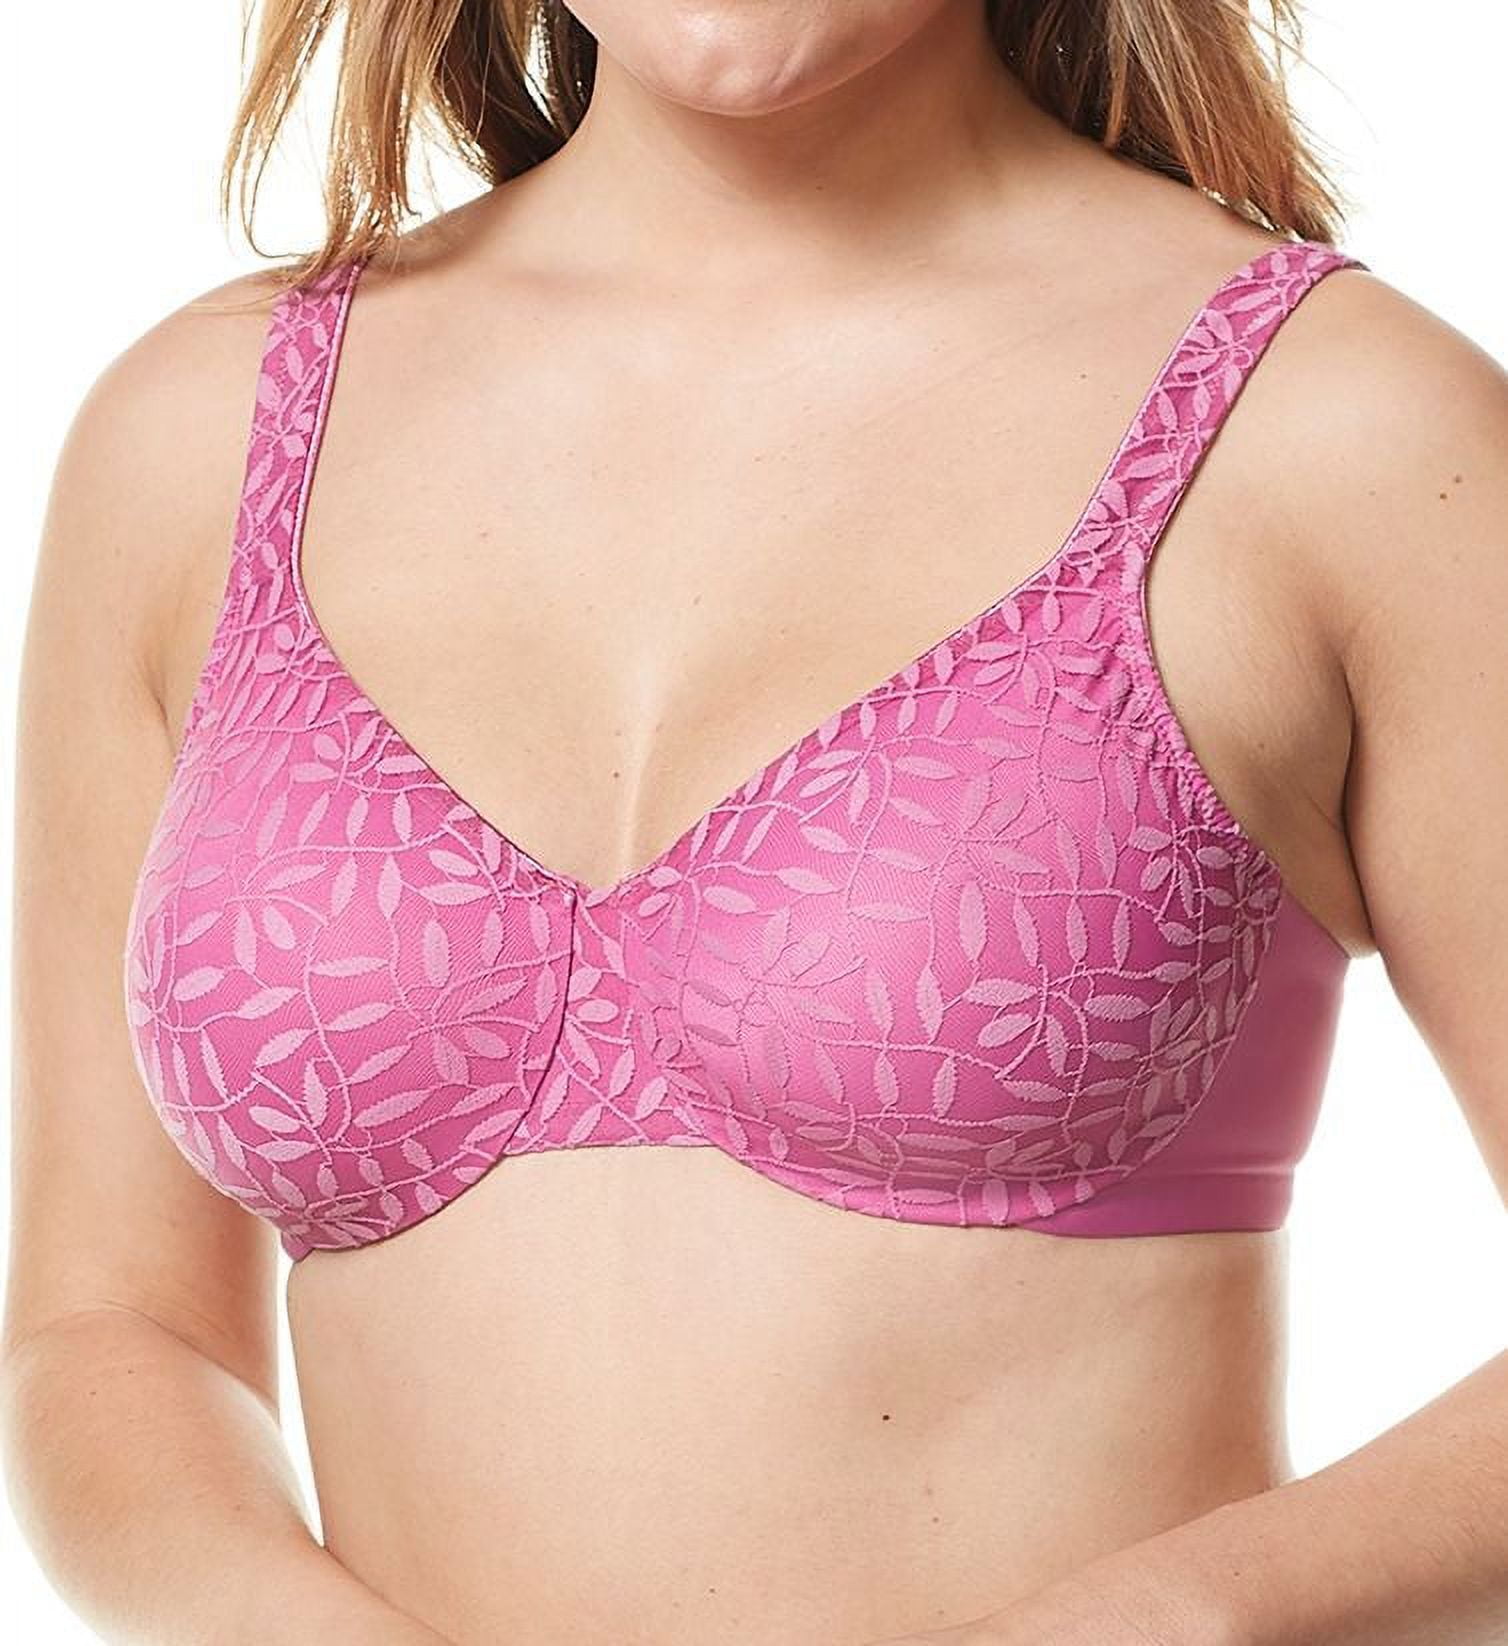 Women's Olga 35519 Lace Sheer Leaves Underwire Minimizer Bra (Red